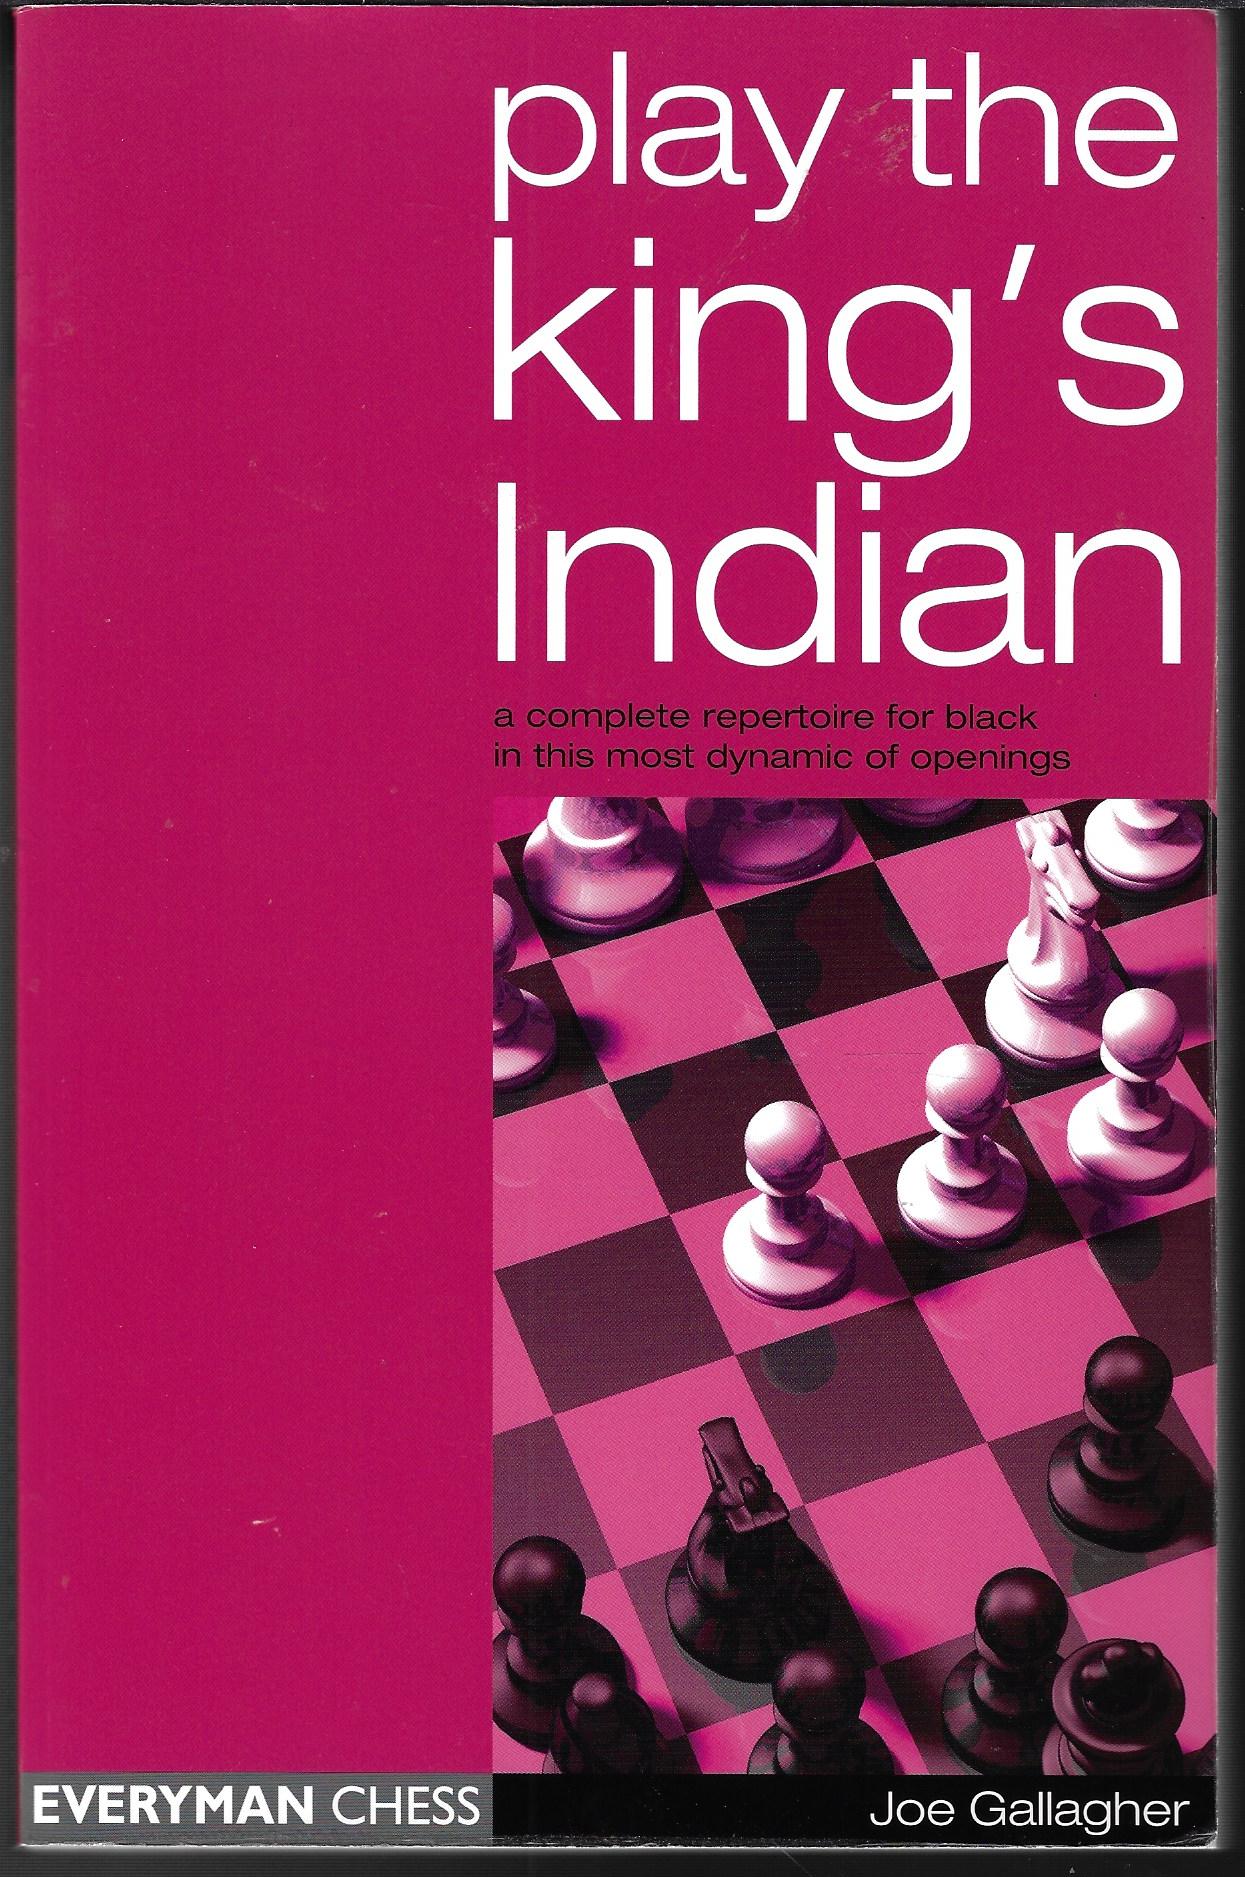 Challagher, Joe - Play the King's Indian -a complete repertoire for black in this most dynamic of openings